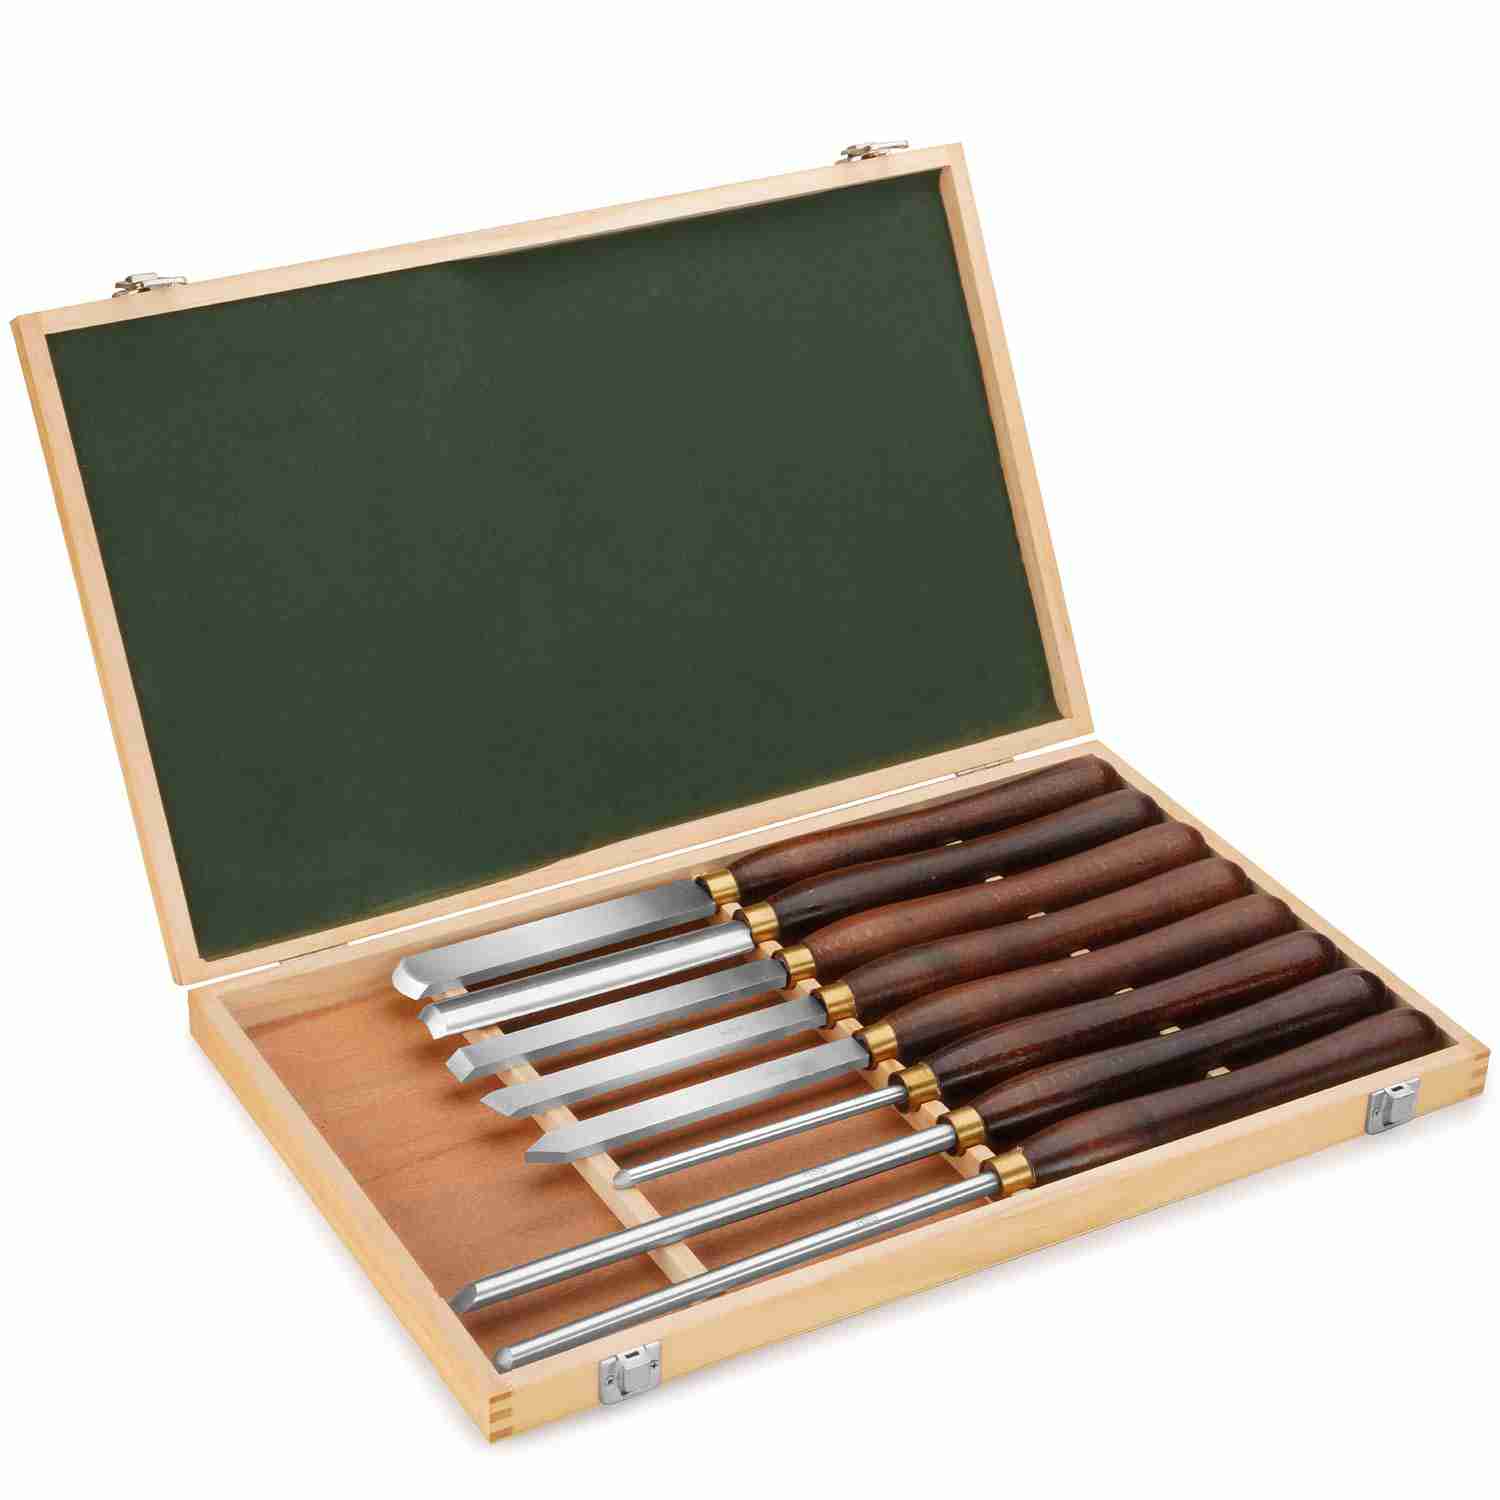 lathe-chisel-set-hss-wood-turning-tools-woodworking with cash back rebate